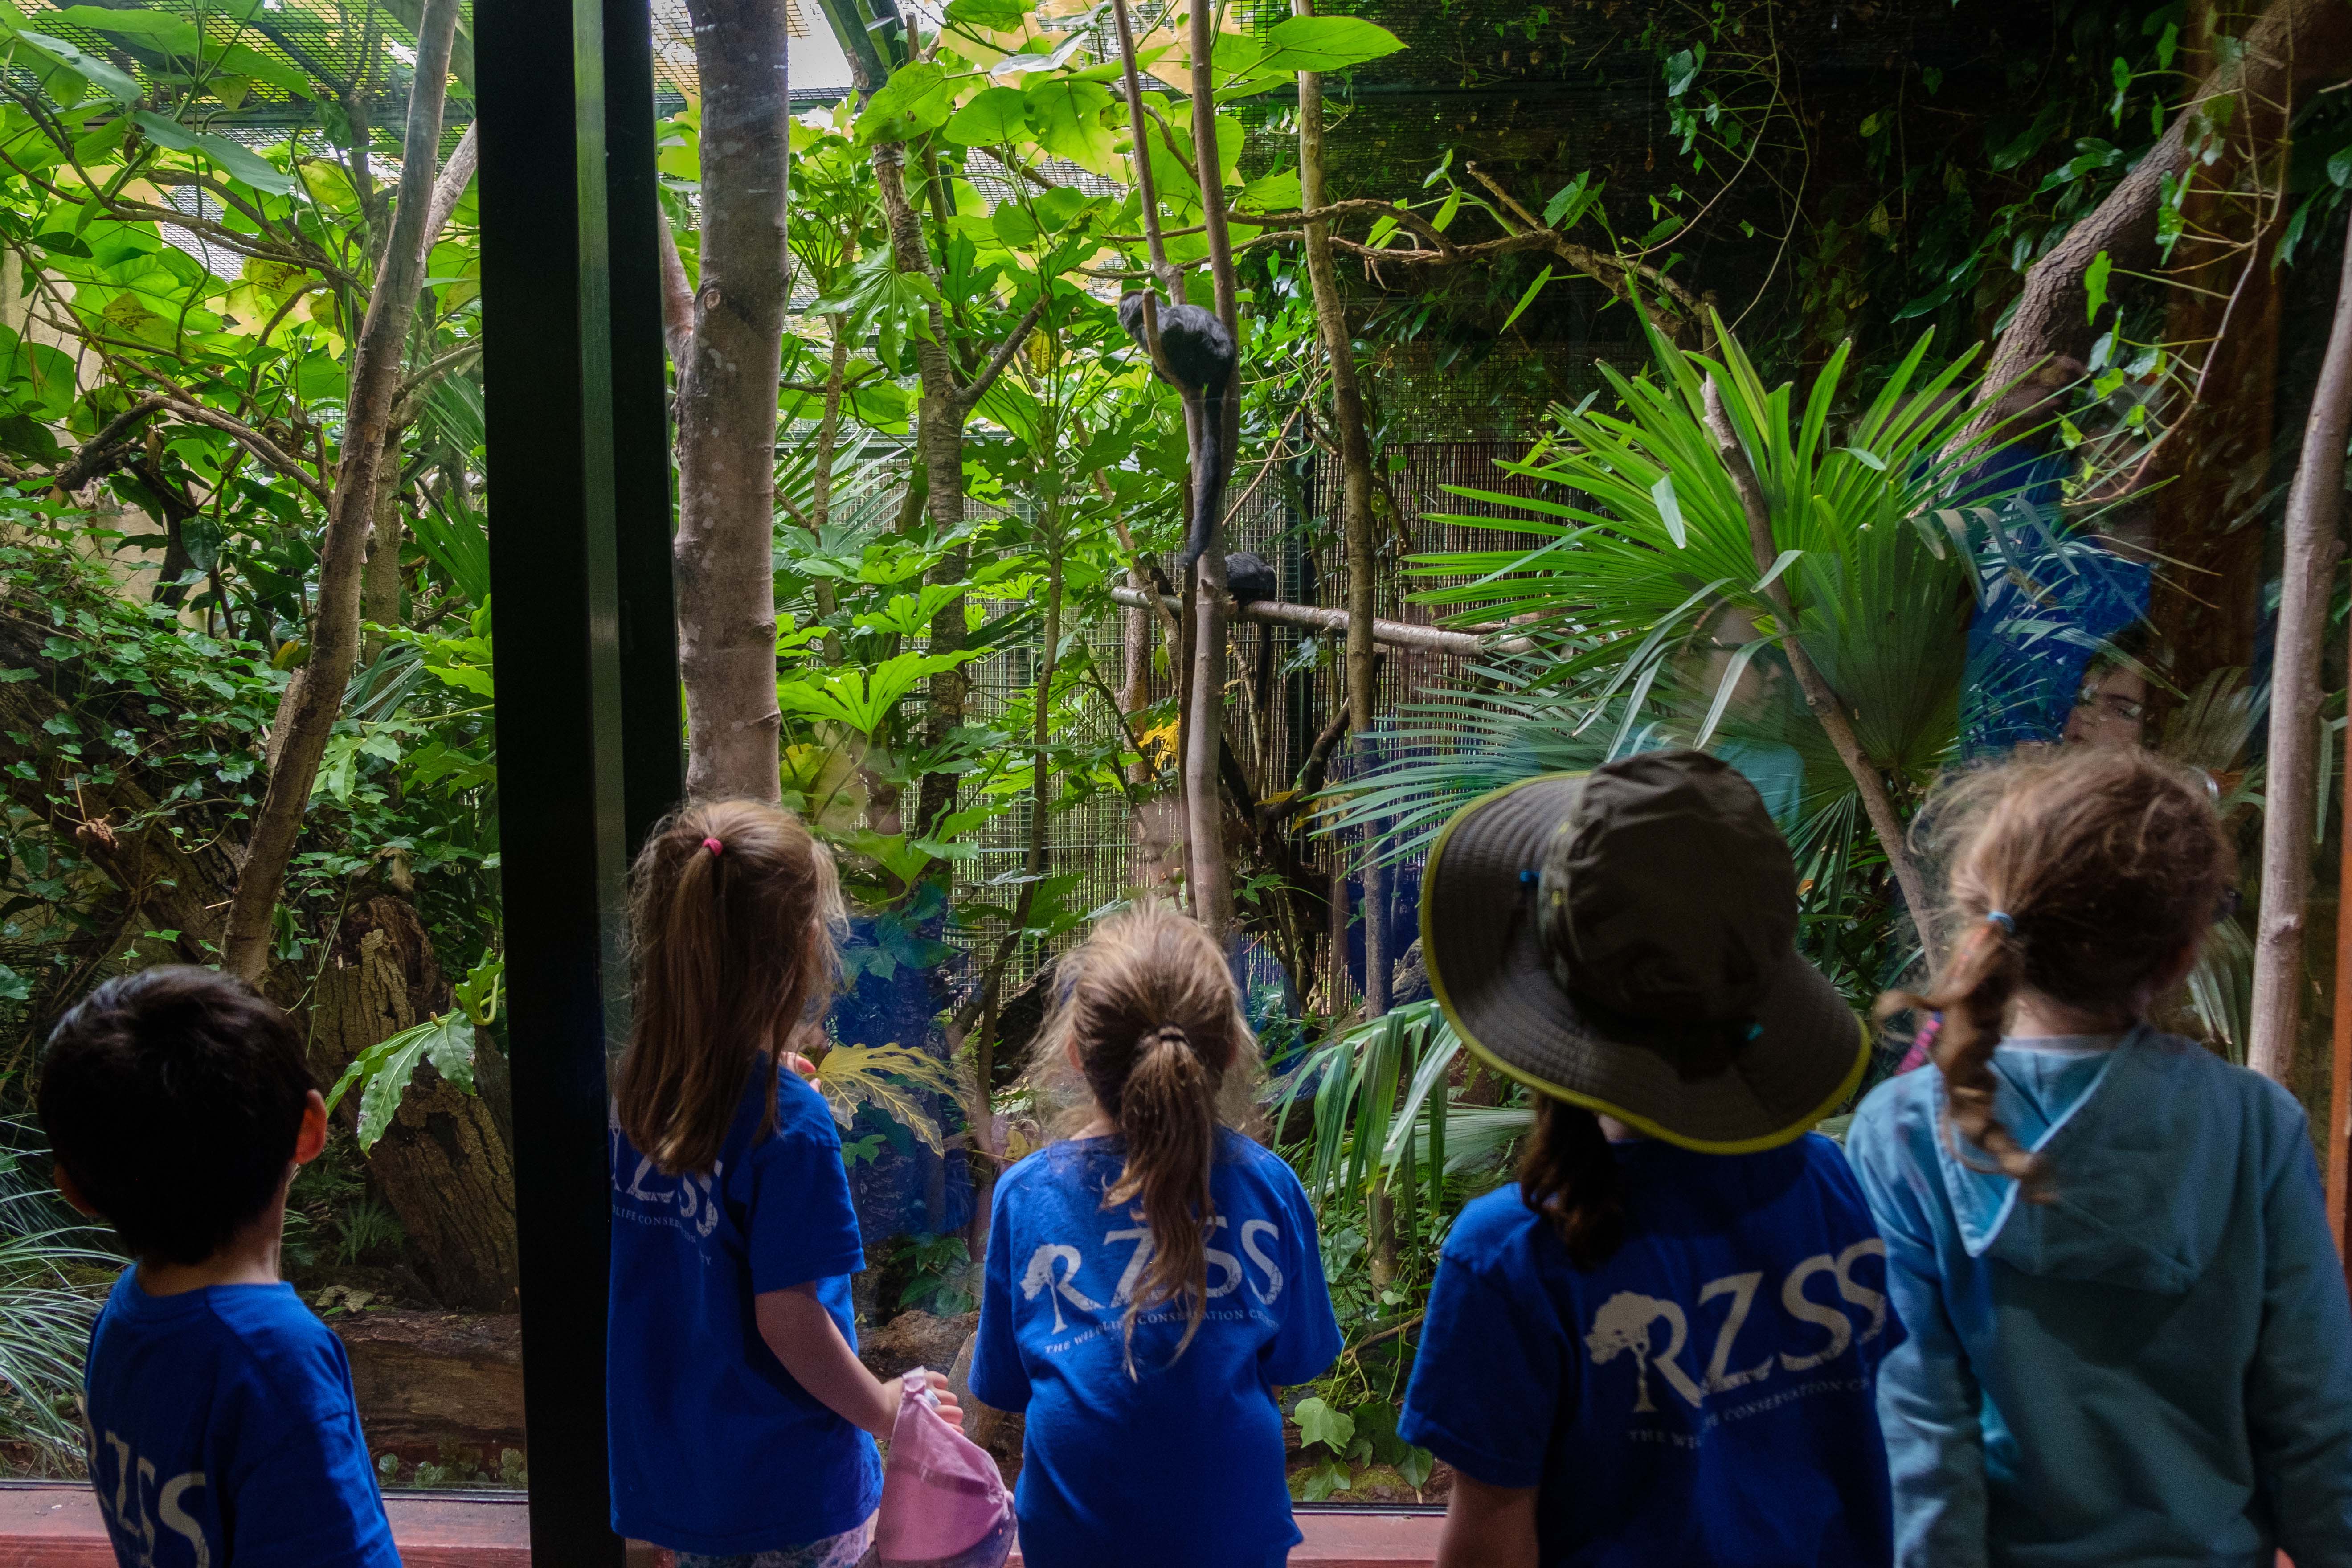 Summer school children viewing in Magic Forest with RZSS logo on tshirt backs IMAGE: Robin Mair 2022